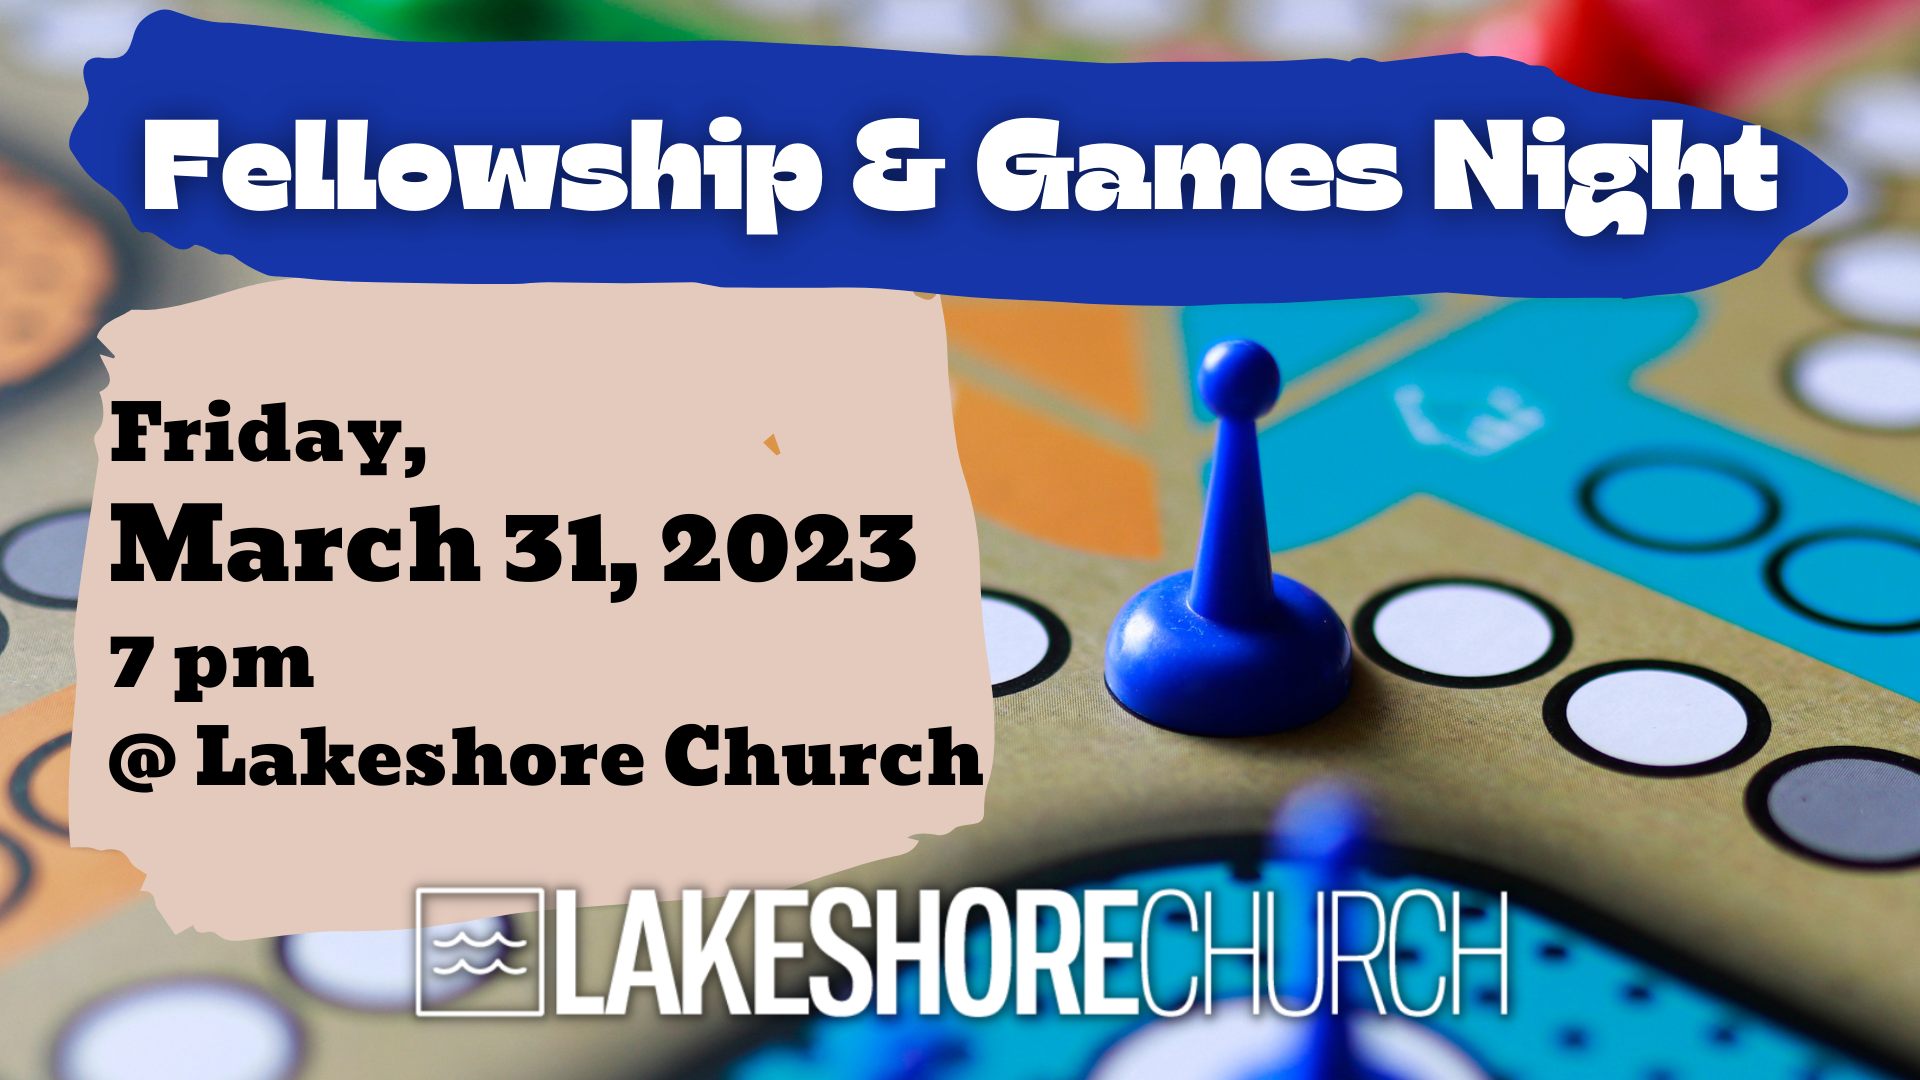 Featured image for “Fellowship & Games Night”